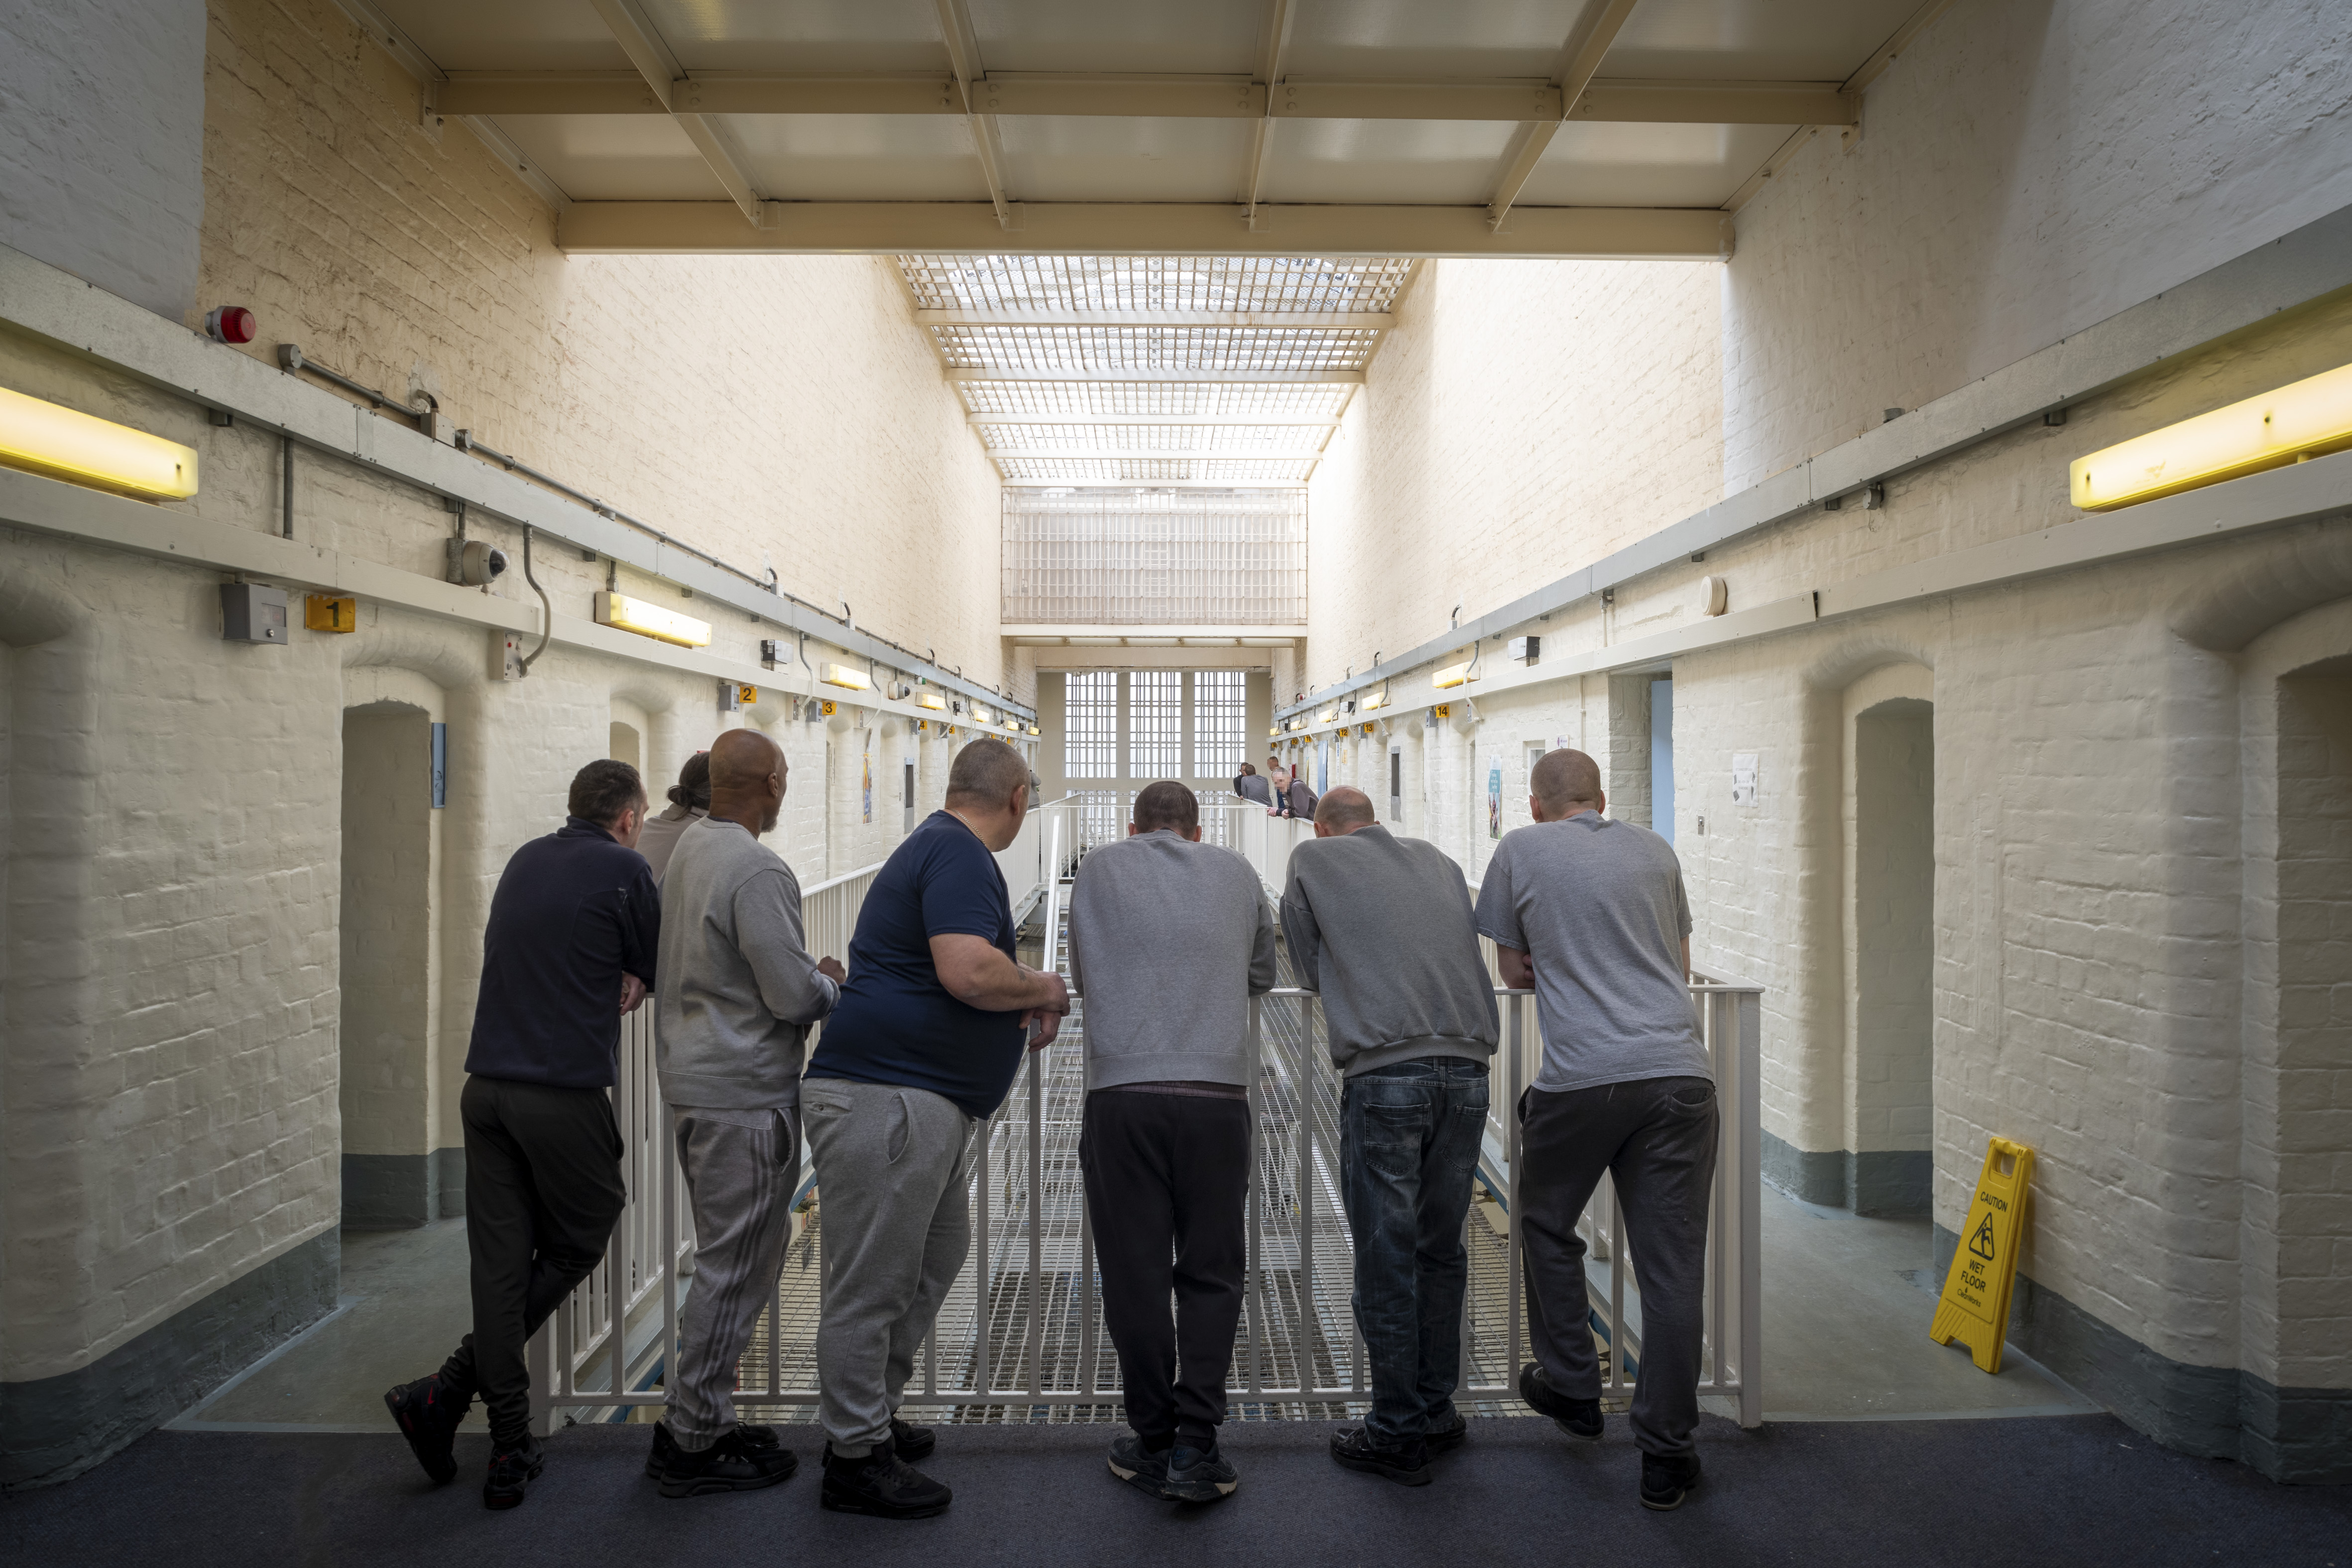 A group of prisoners gathered on a landing area in a prison looking over a railing to the floor below